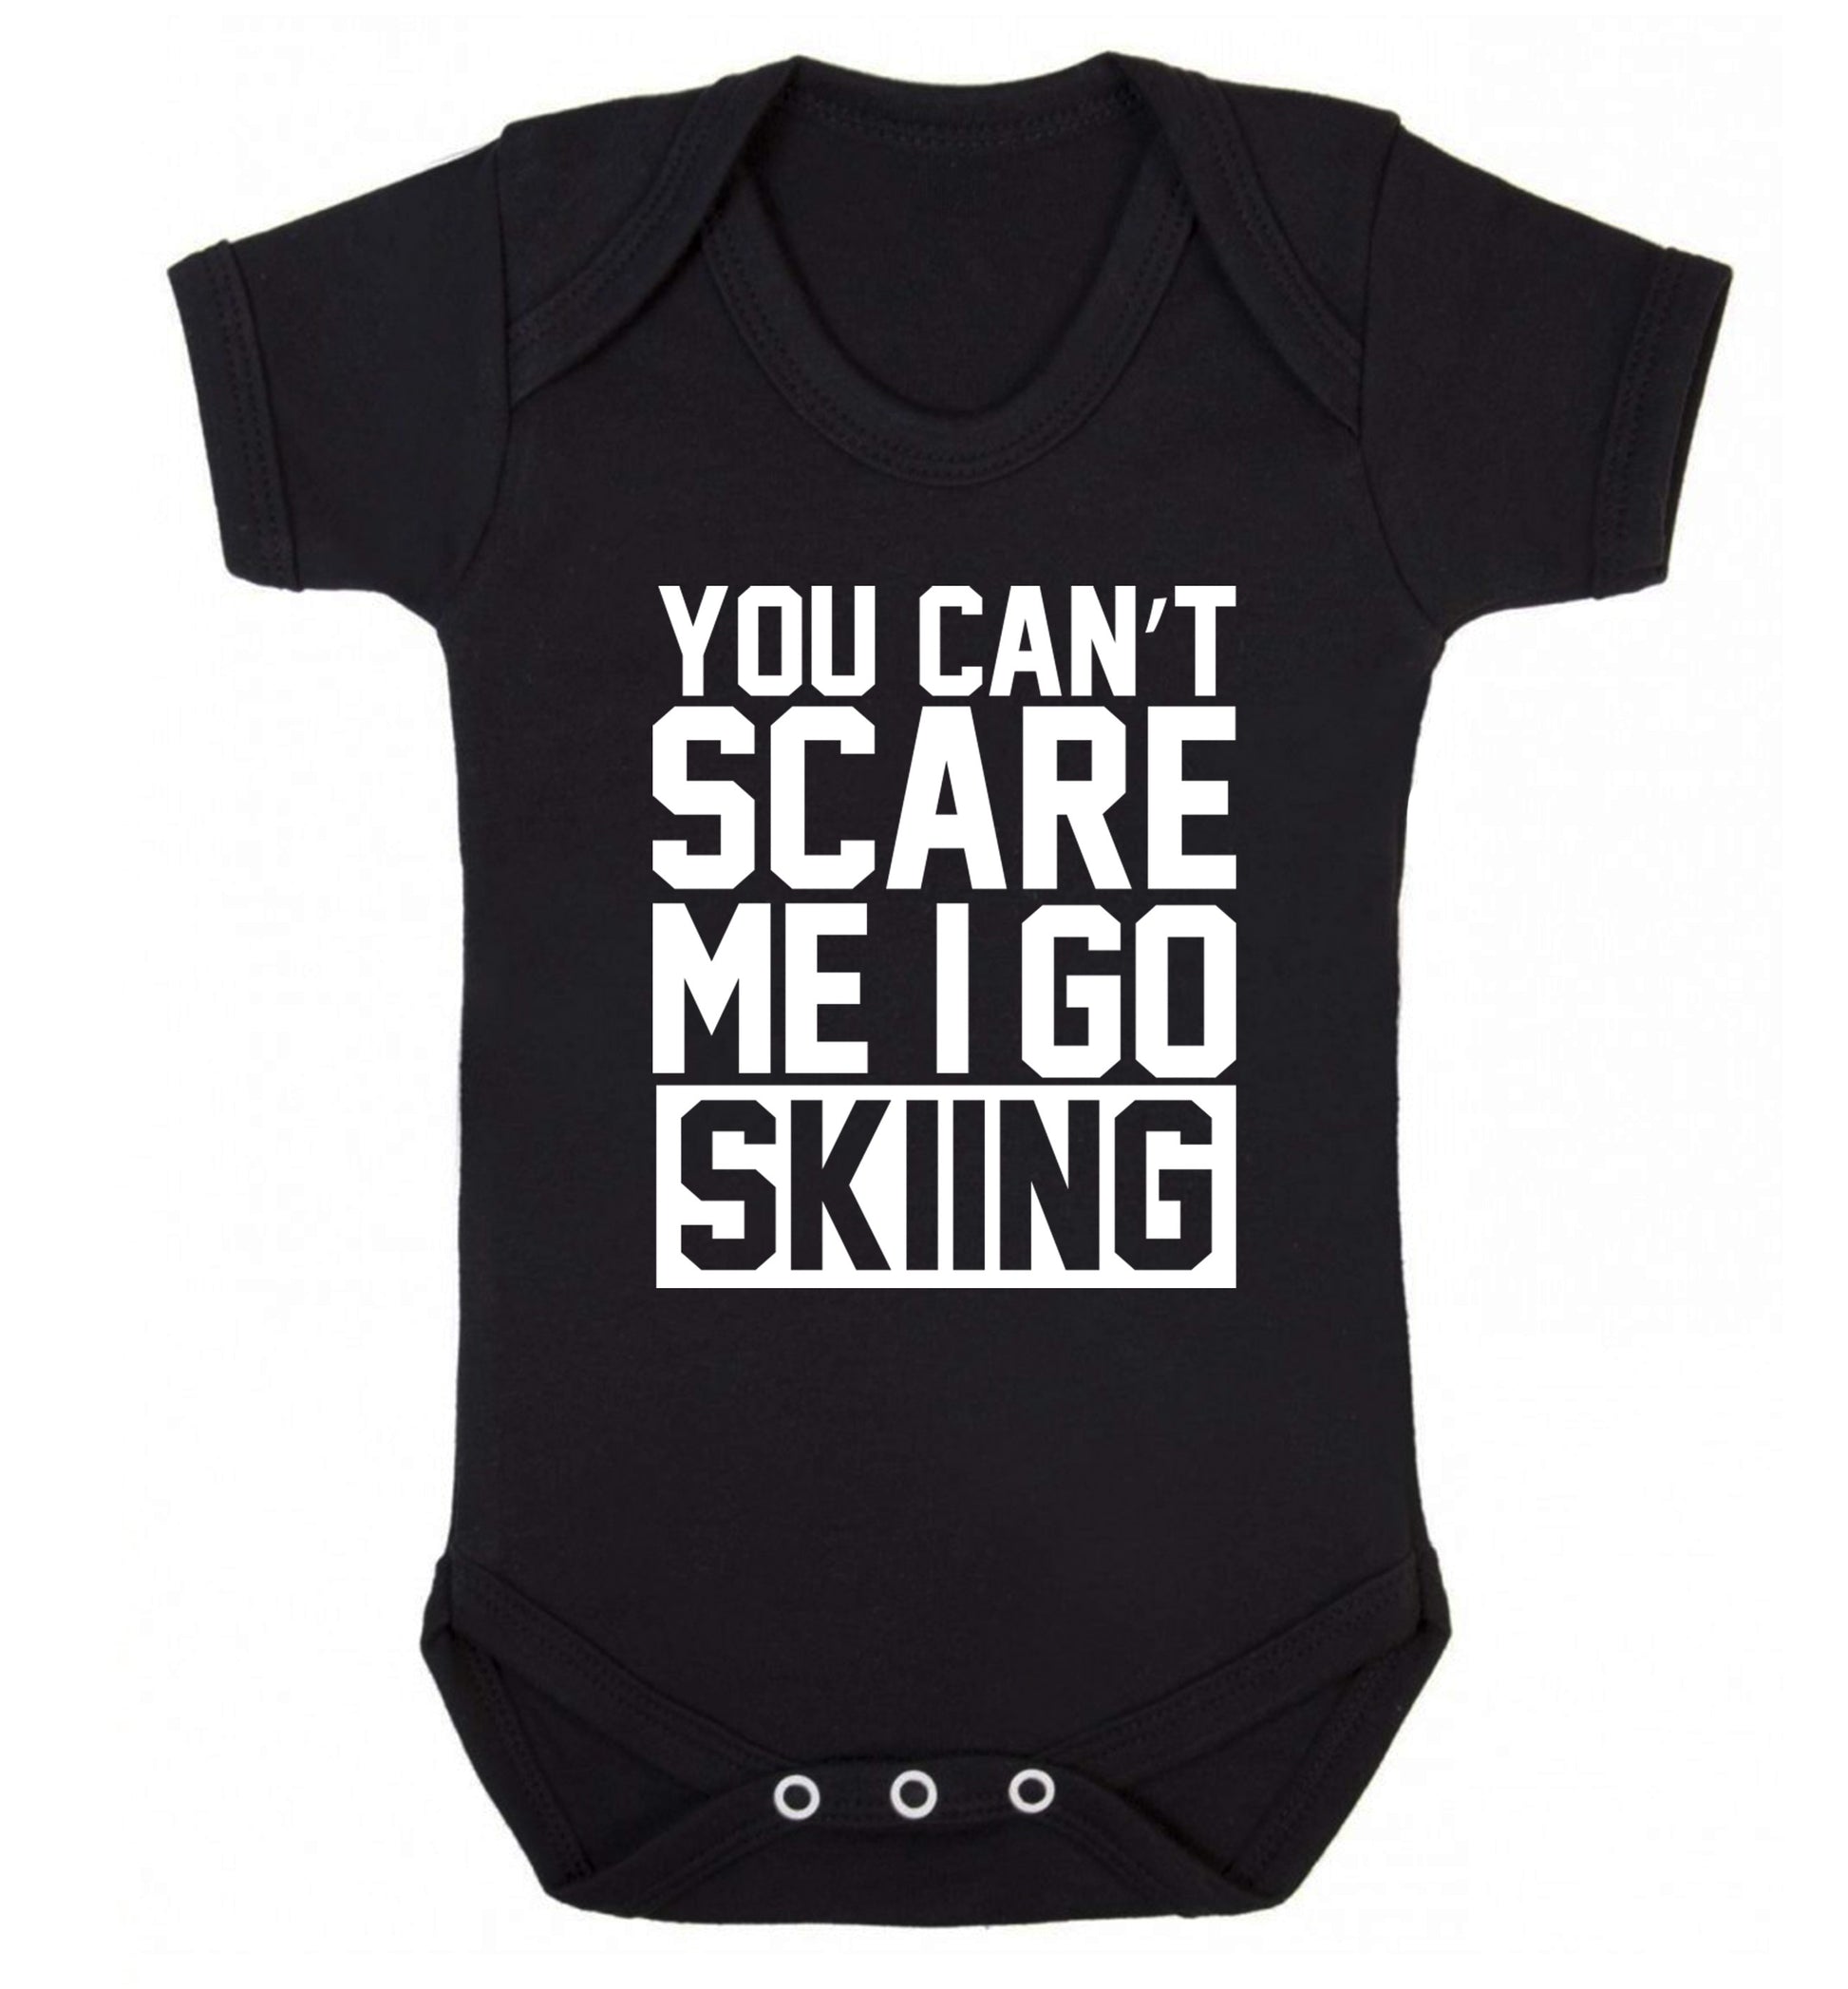 You can't scare me I go skiing Baby Vest black 18-24 months